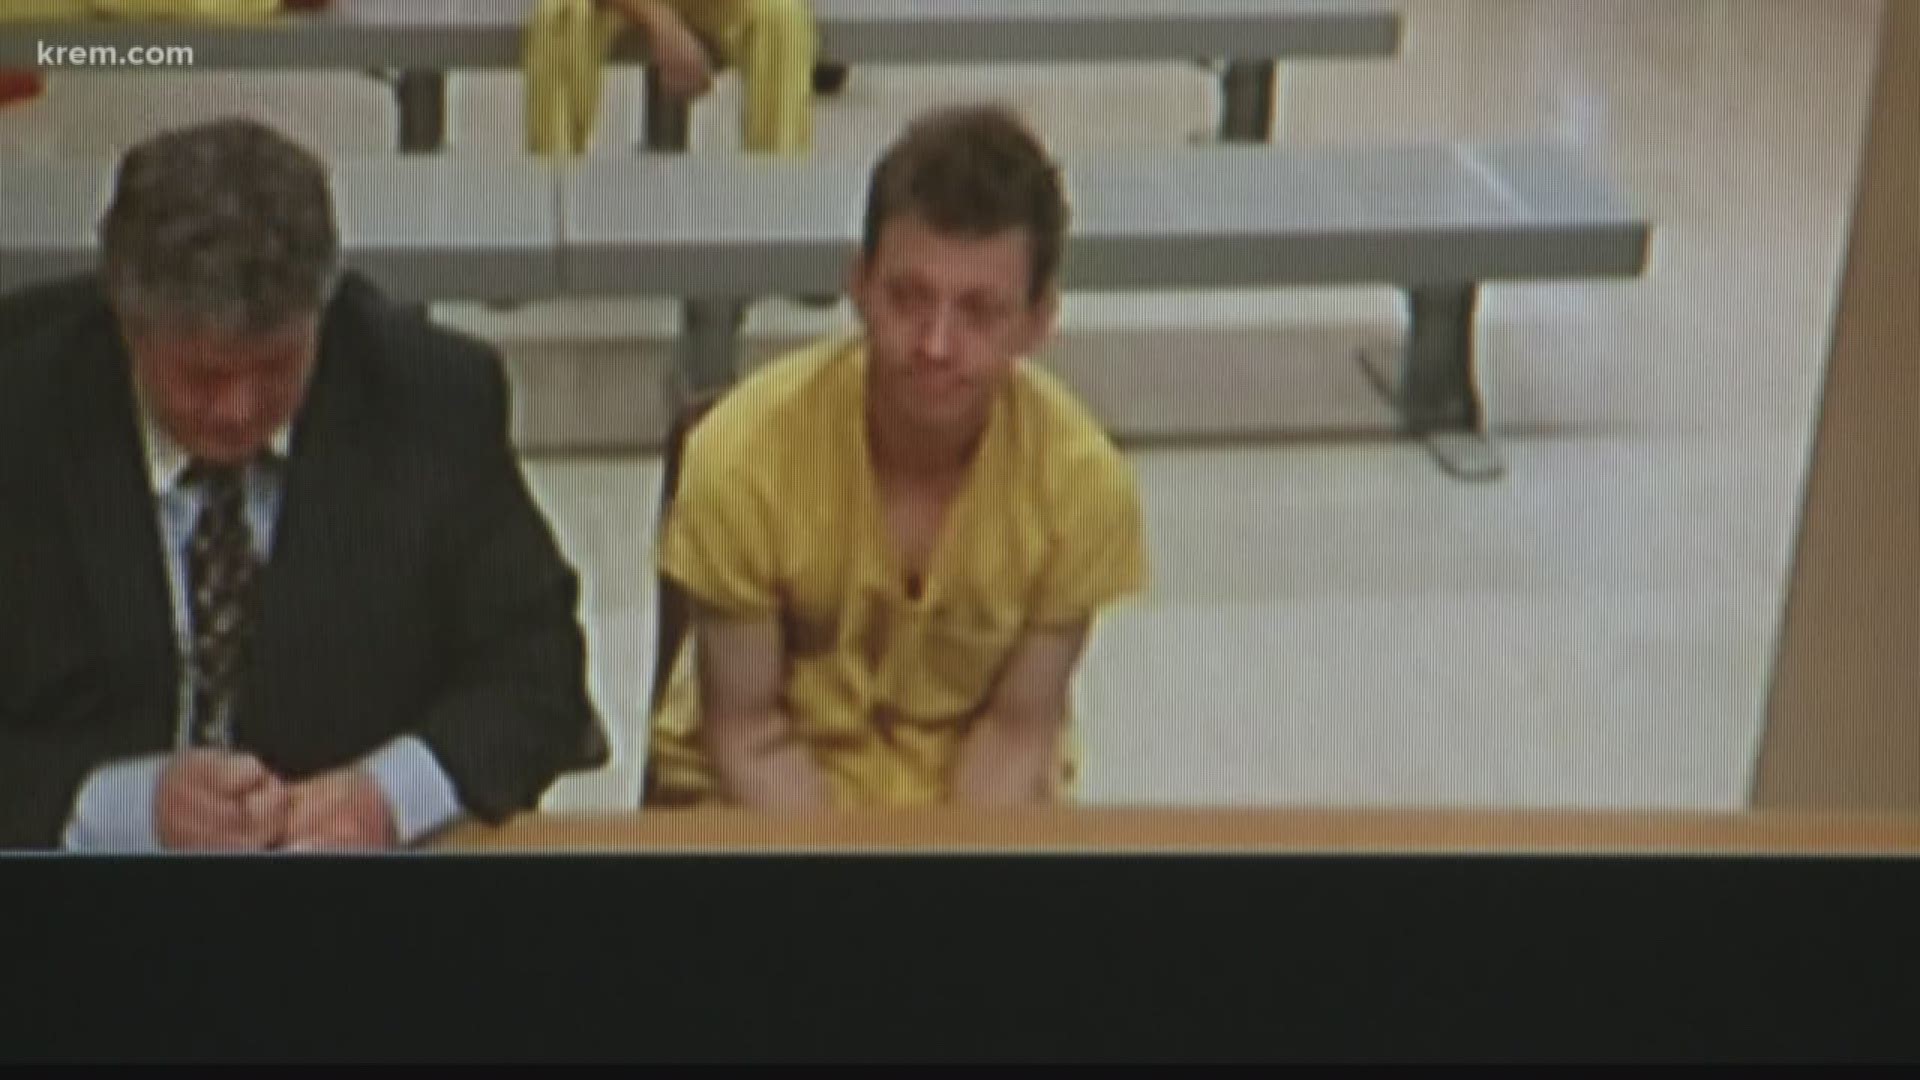 The man accused of killing a 15-year-old boy in downtown Spokane made his first court appearance Thursday afternoon.